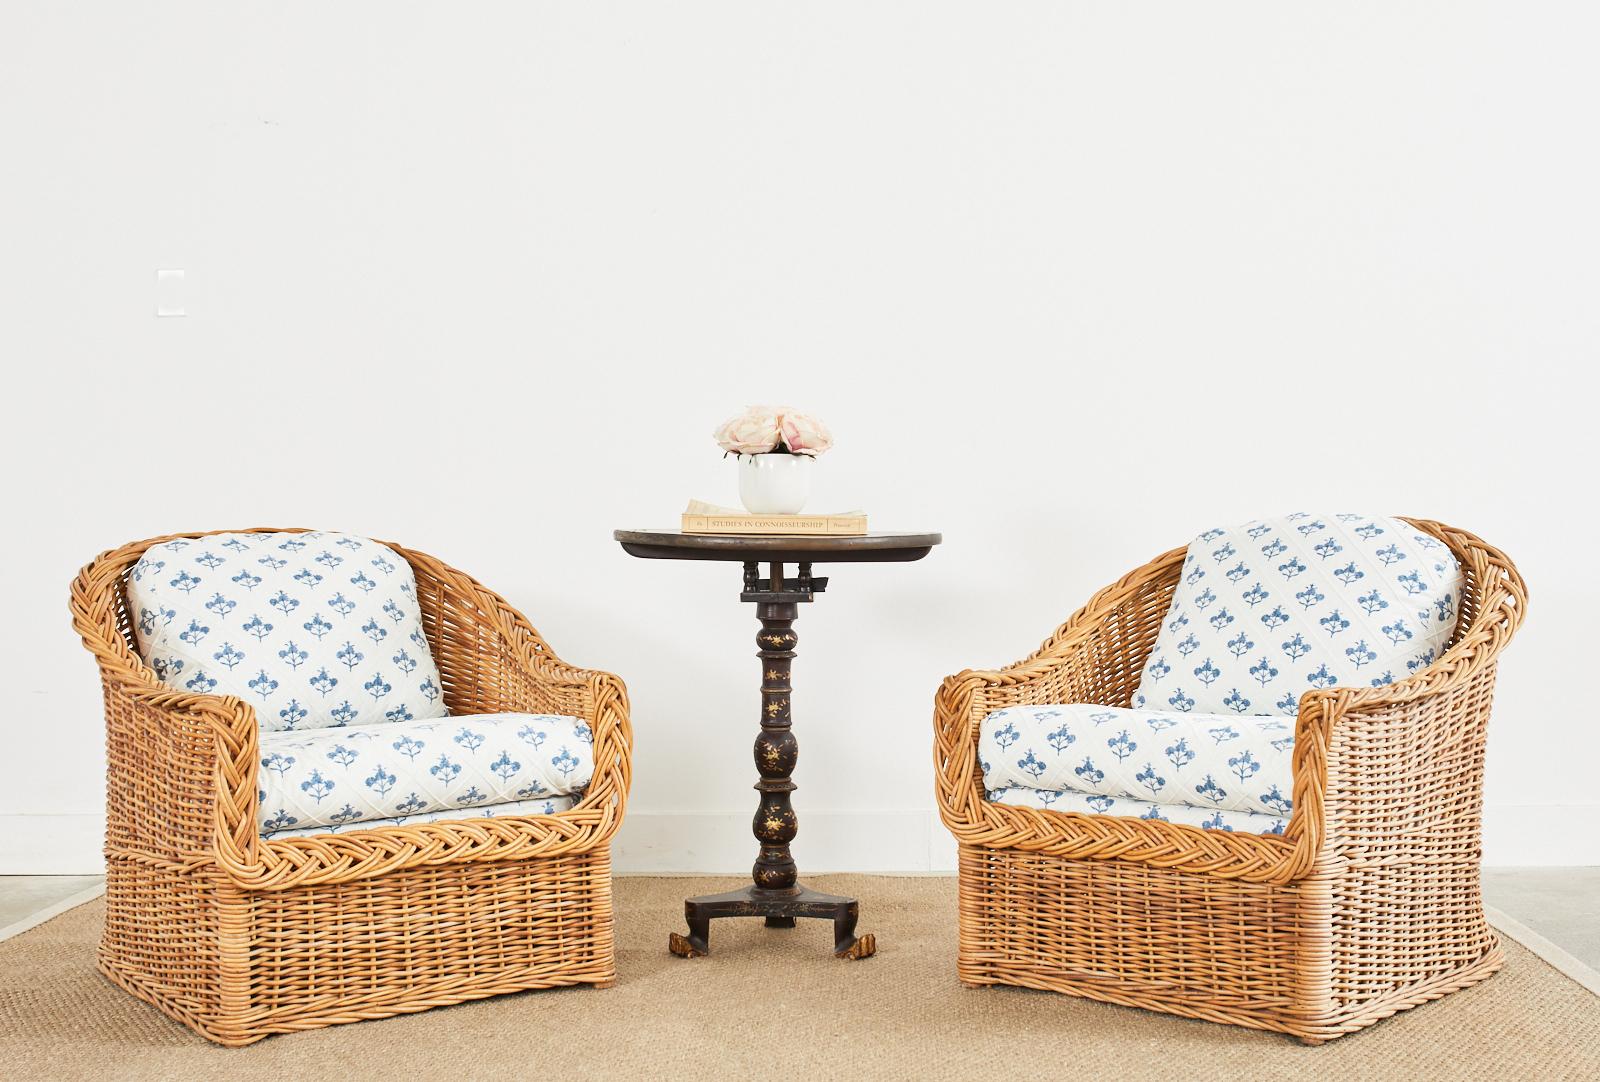 Stylish pair of woven rattan wicker lounge chairs made in the California organic modern style by The Wicker Works in San Francisco. The timeless design features a modern redux of blue and white upholstery. The fabric has a geometric diamond pattern